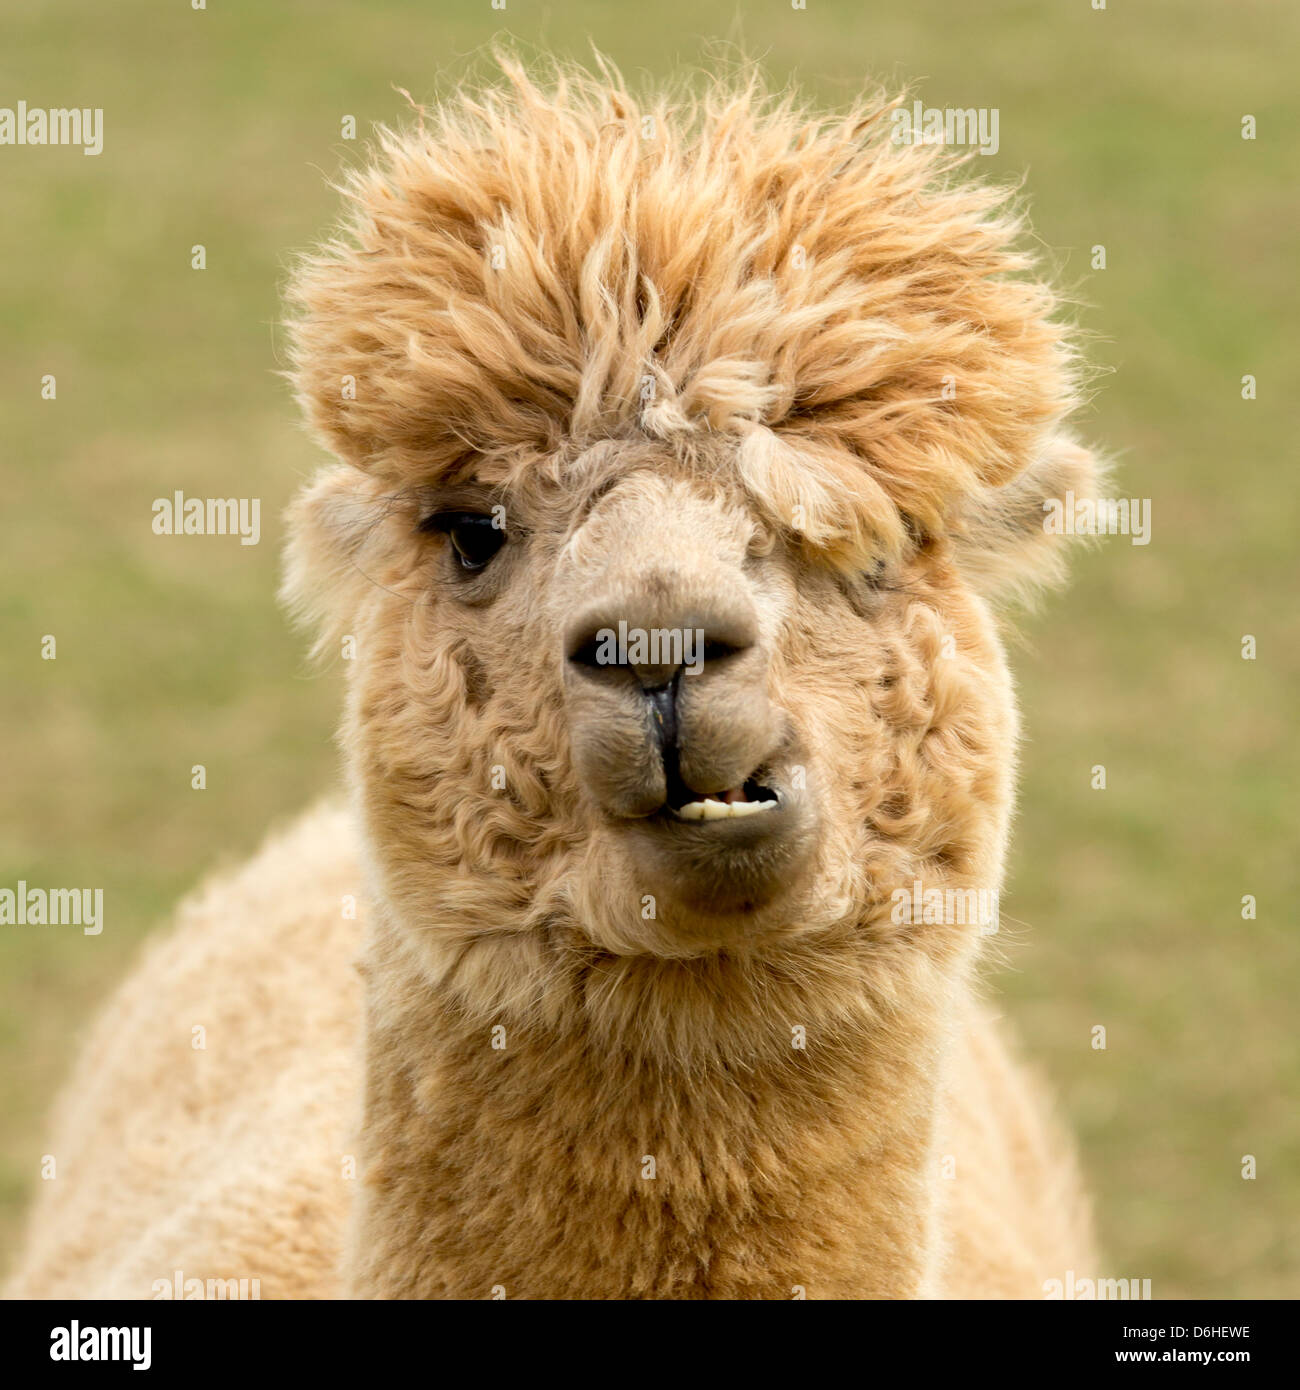 Alpaca with a comical expression, on an Alpaca farm at Husthwaite in North Yorkshire, UK. Stock Photo